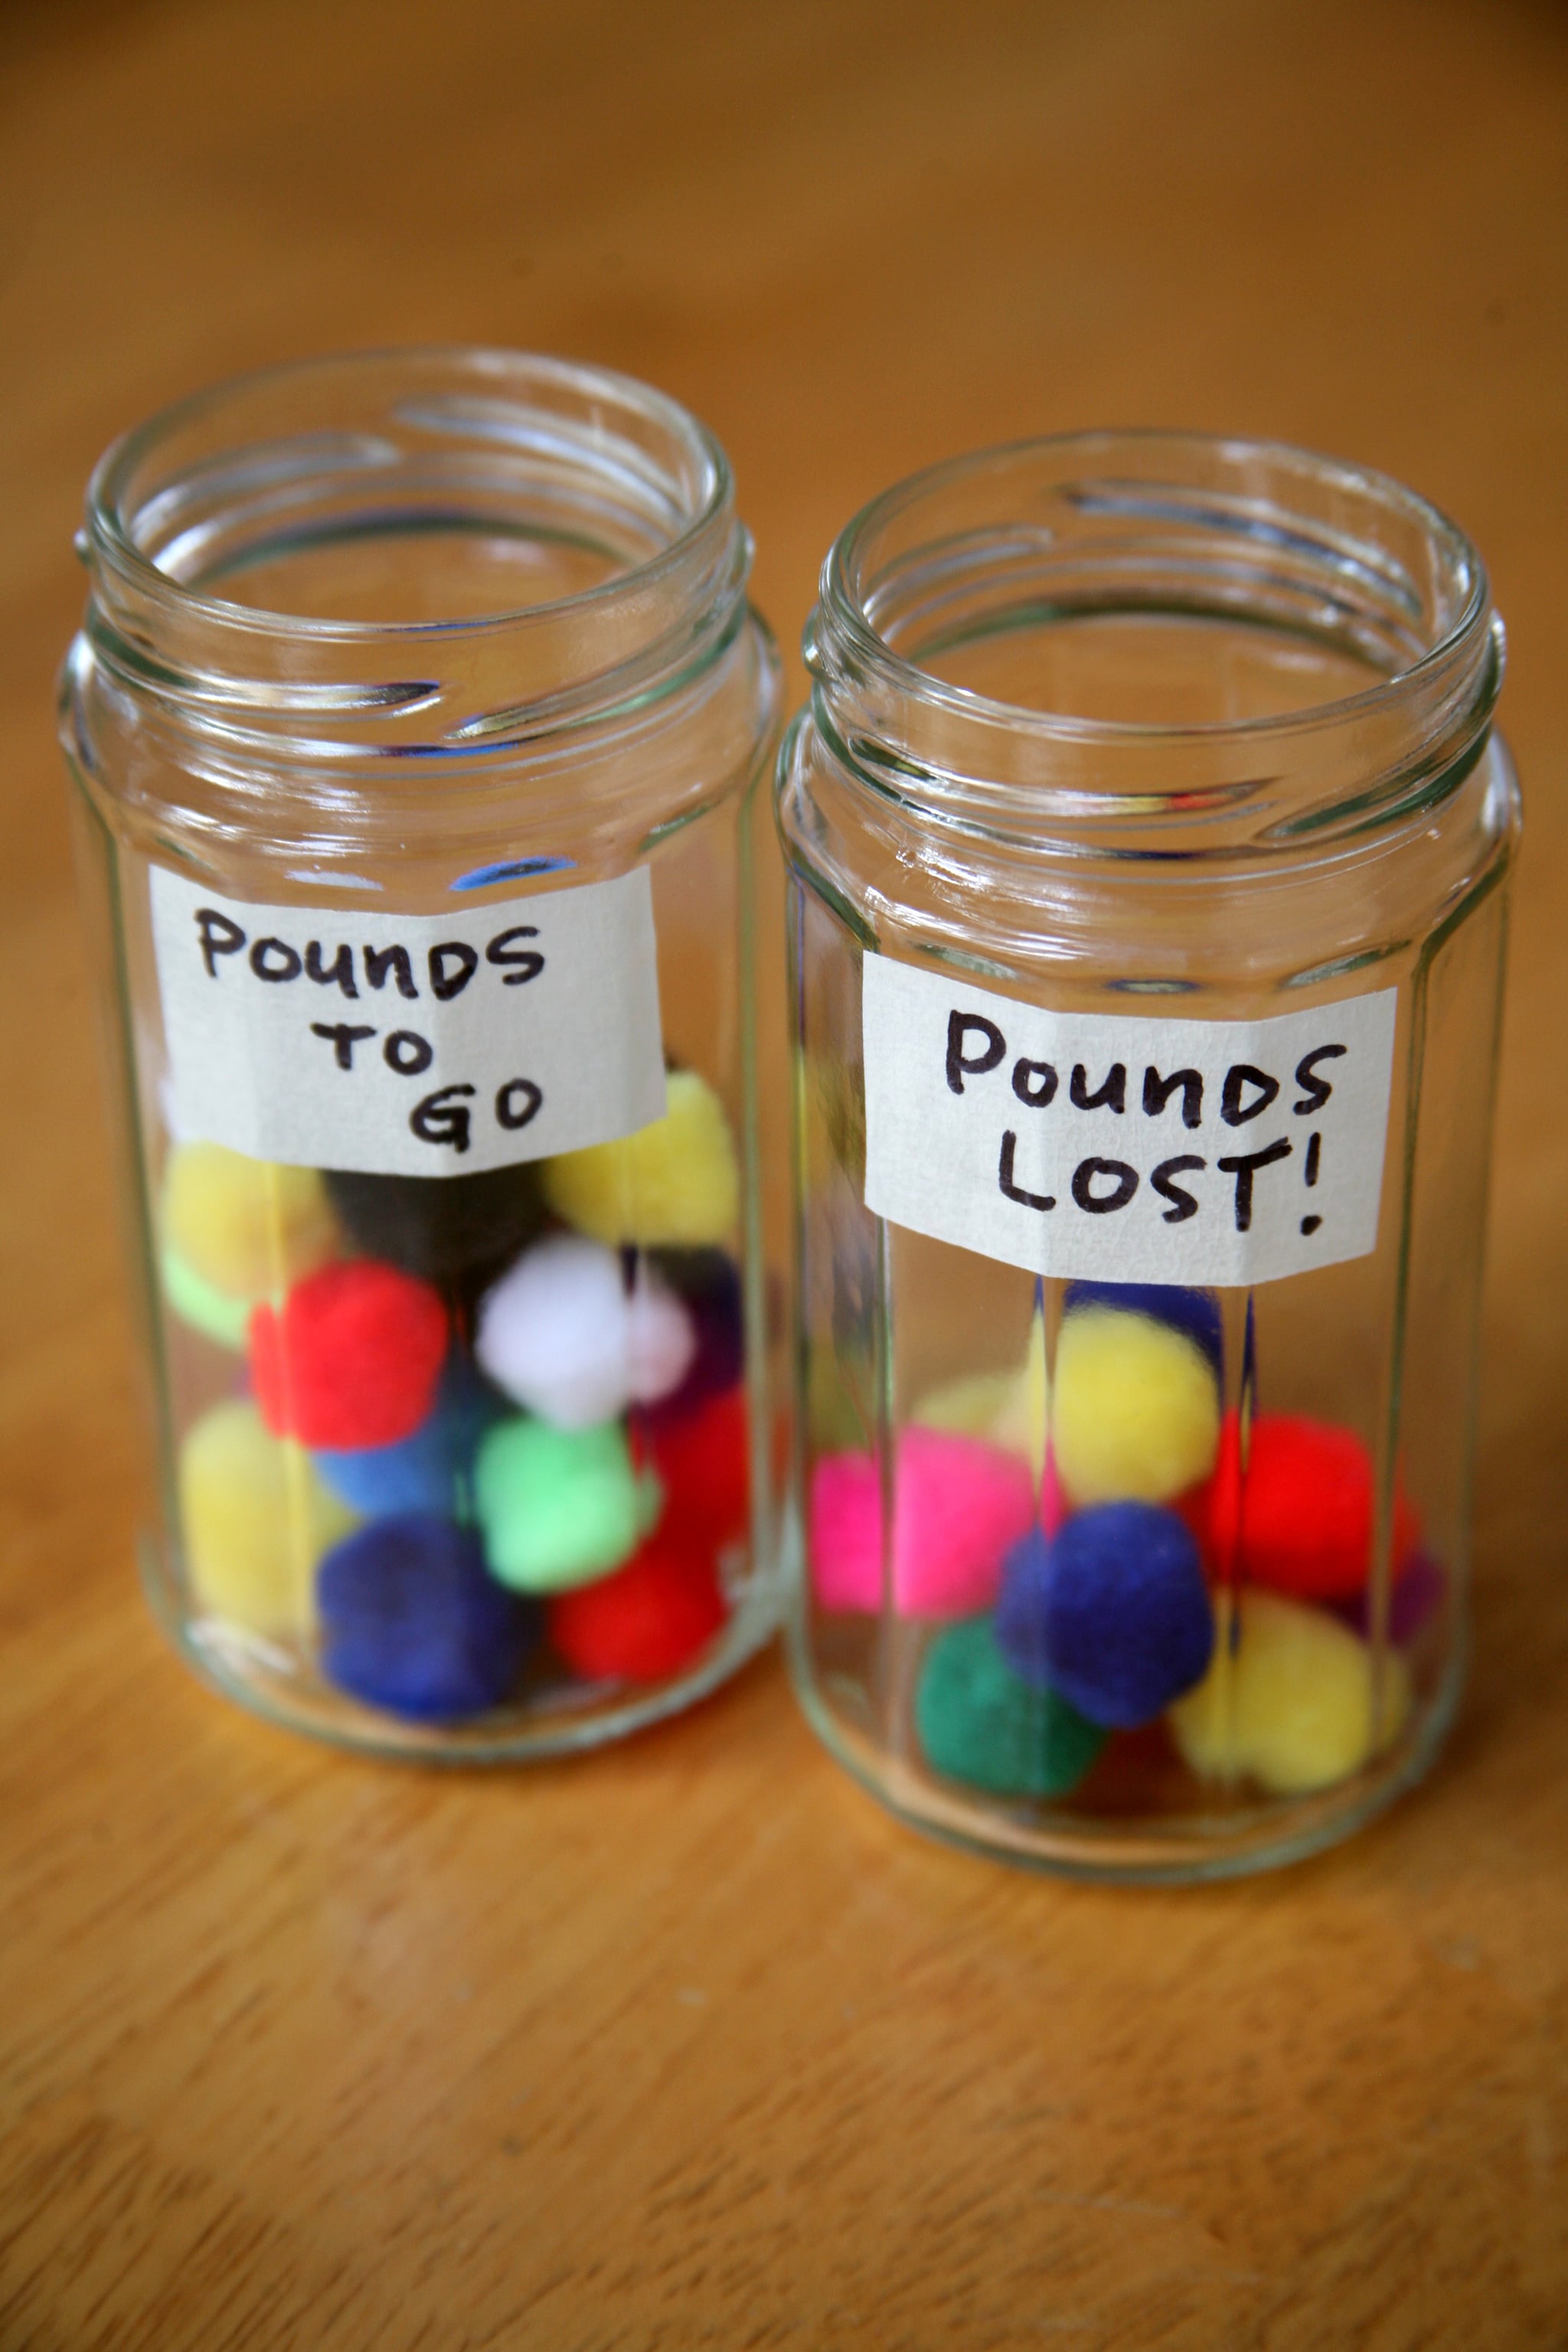 10 tips for weight loss success with Noom - Postcard Jar Blog